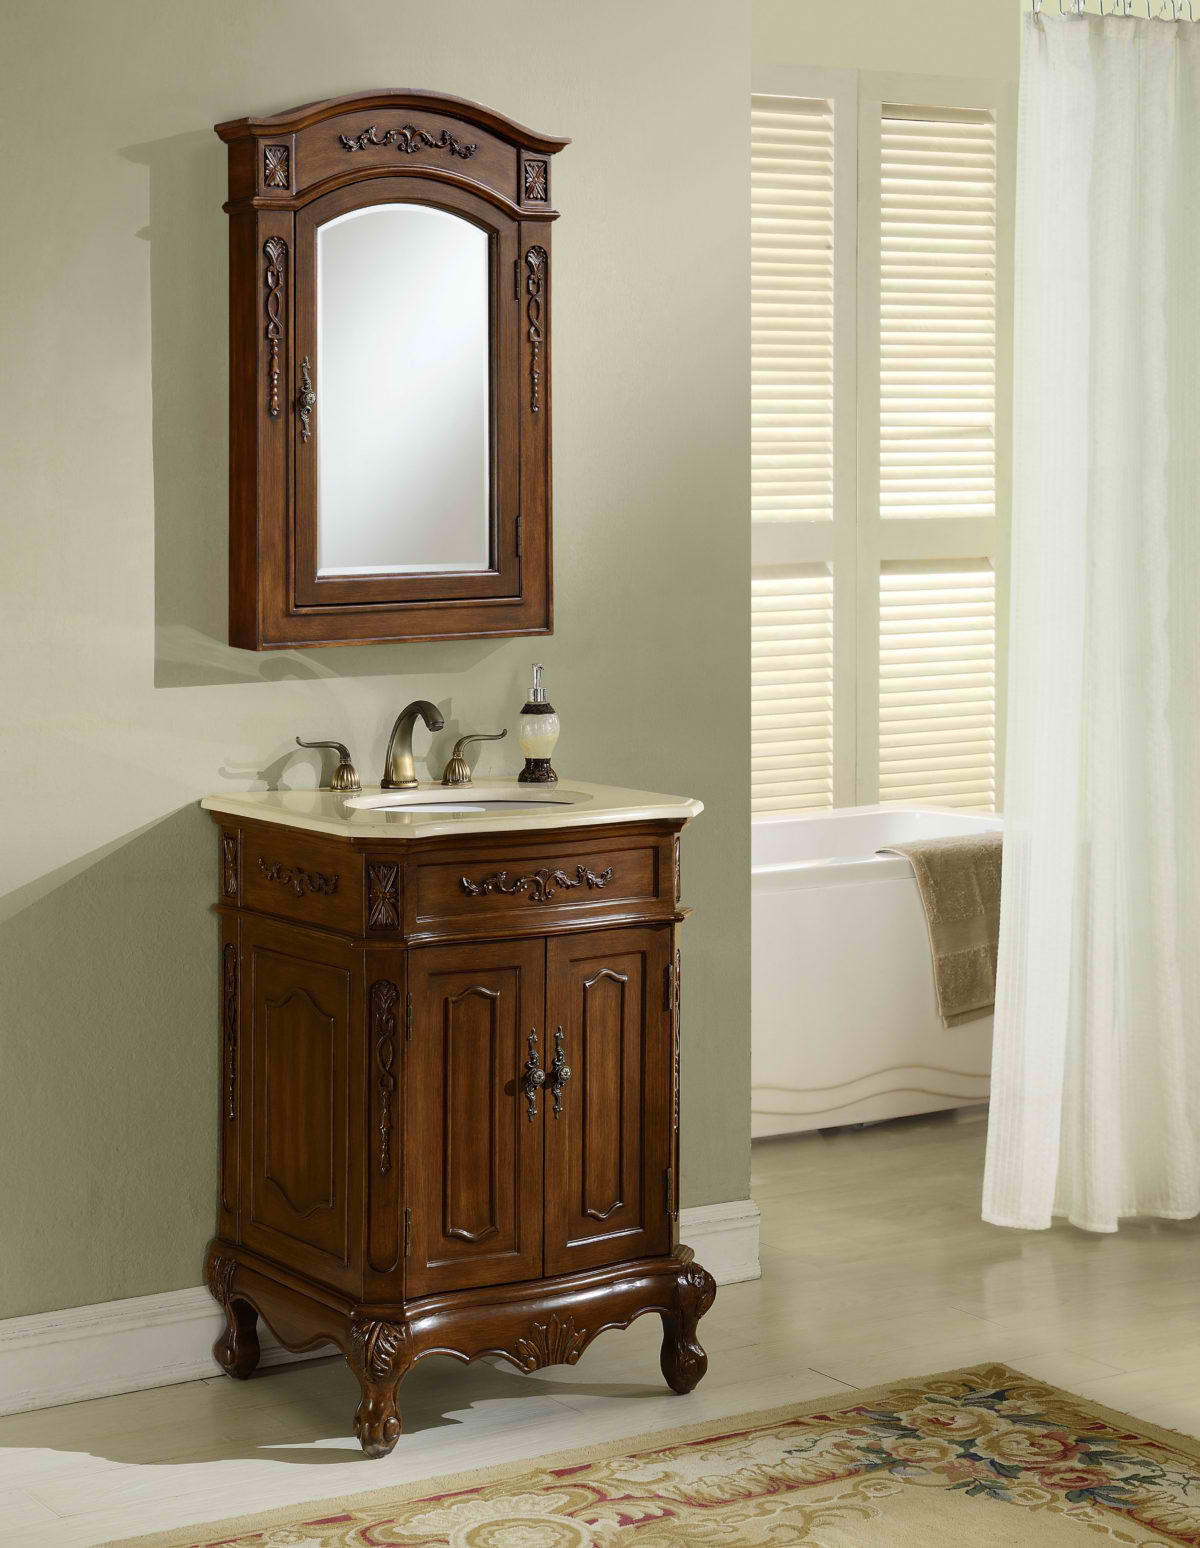 24" Antique Deep Chestnut Finish Vanity with Mirror, Med Cab, and Linen Cabinet Options